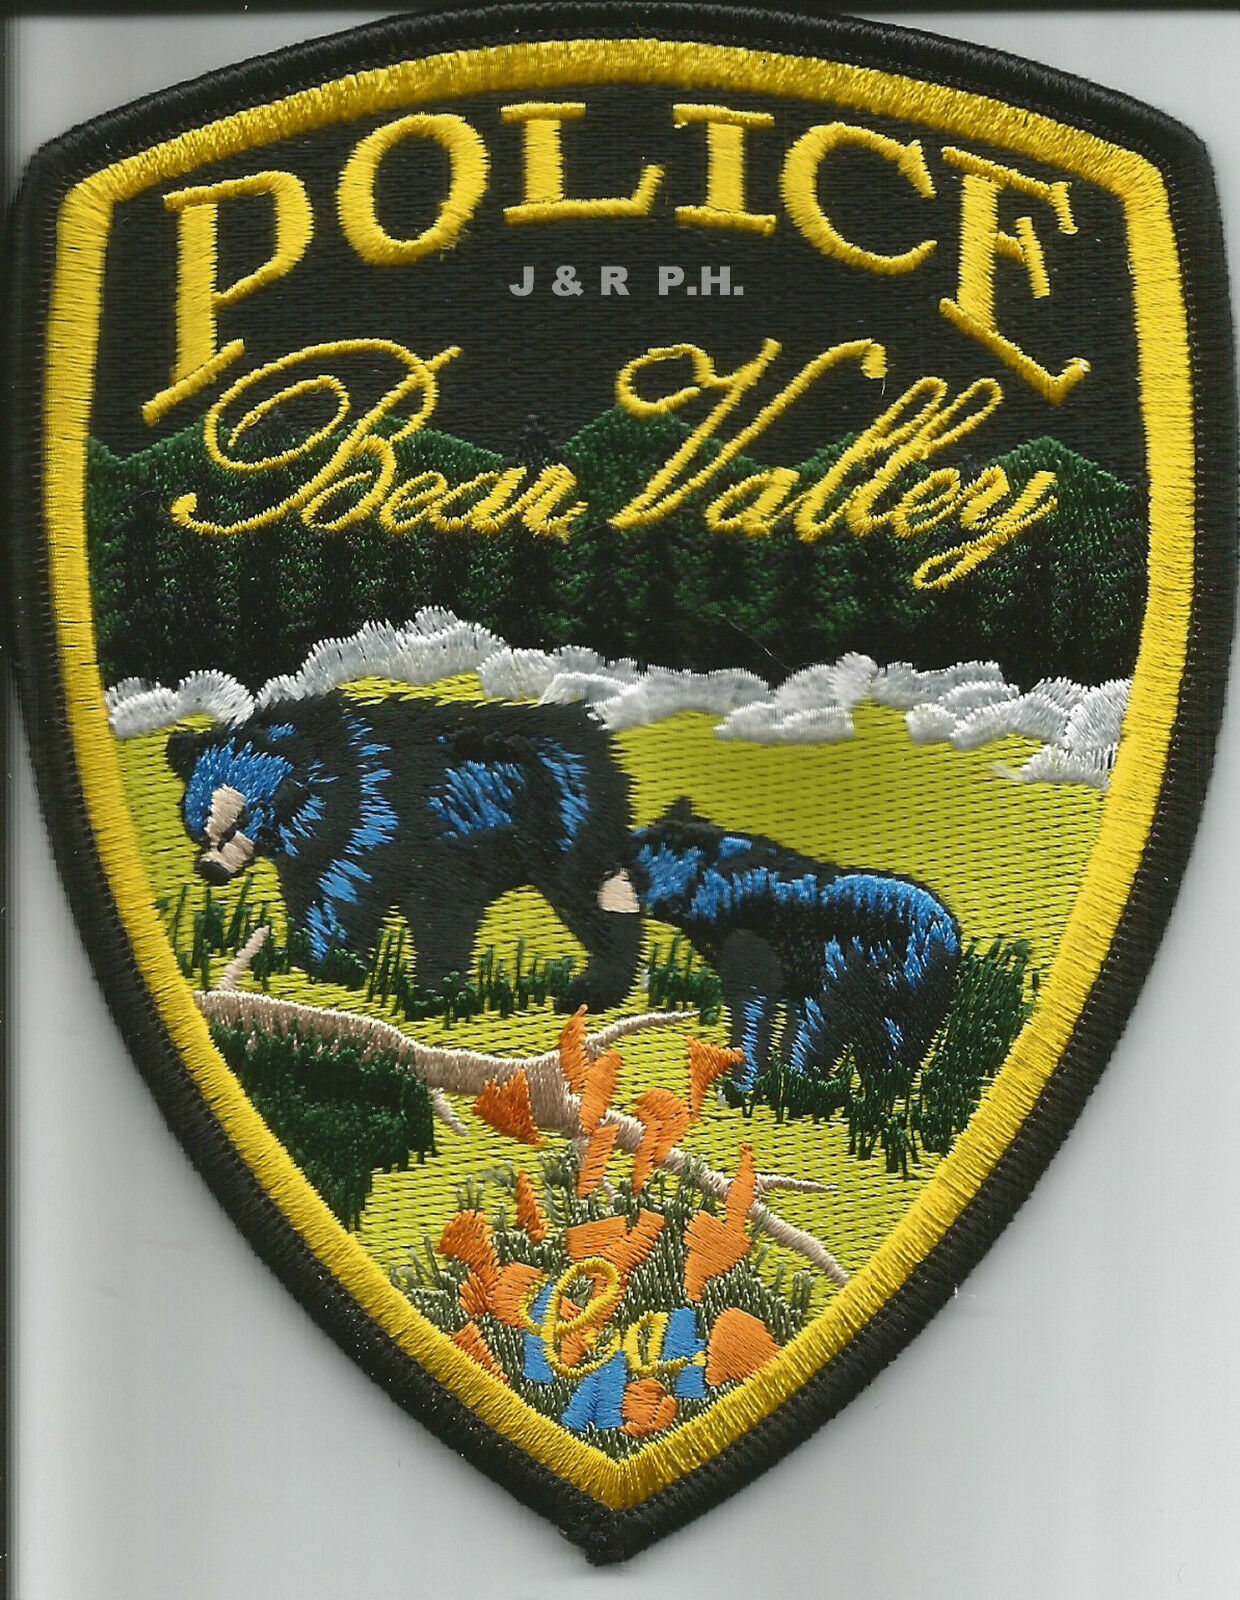 Bear Valley - 2 Bears, California  (4" X 5" Size)  Shoulder Police Patch (fire)